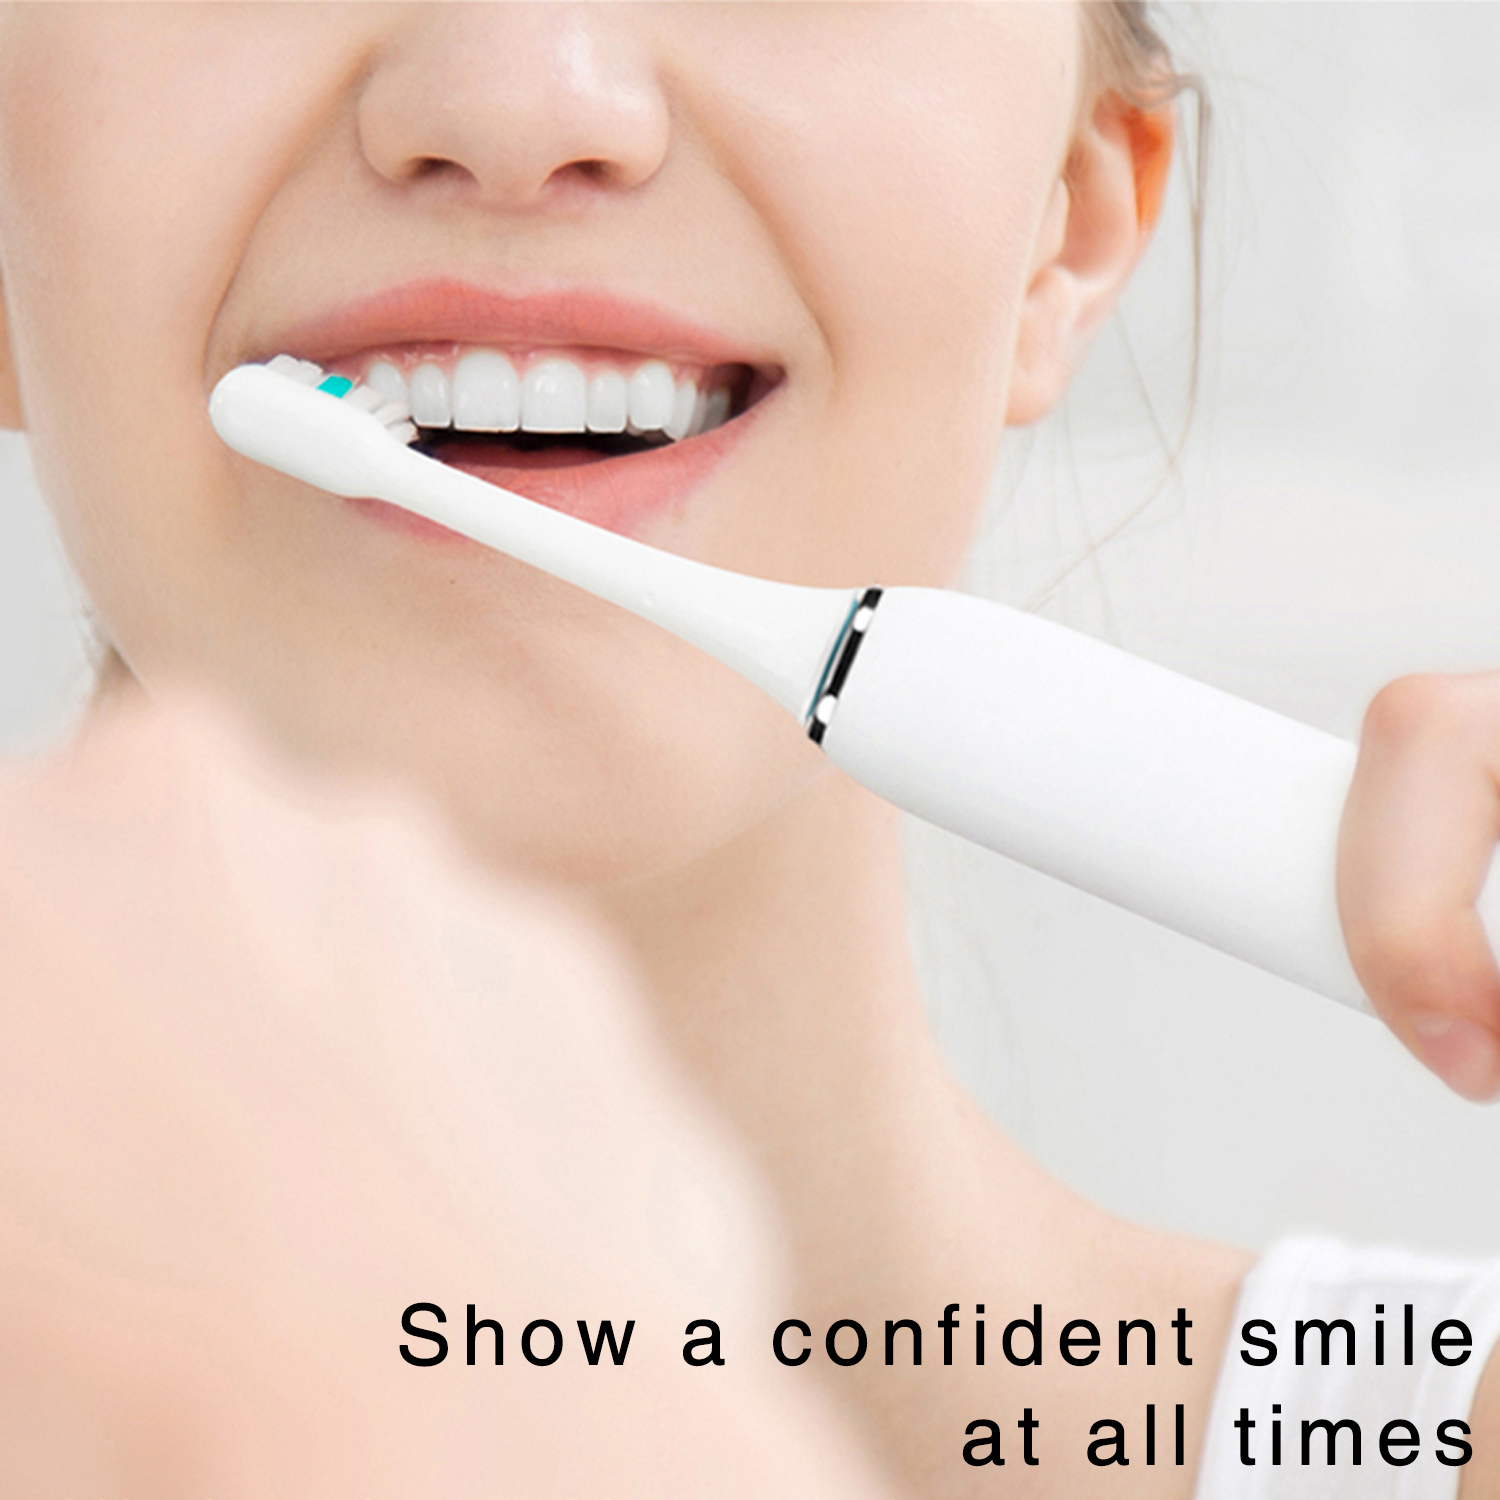 Revolutionize Your Oral Hygiene with Our Advanced Electric Toothbrush